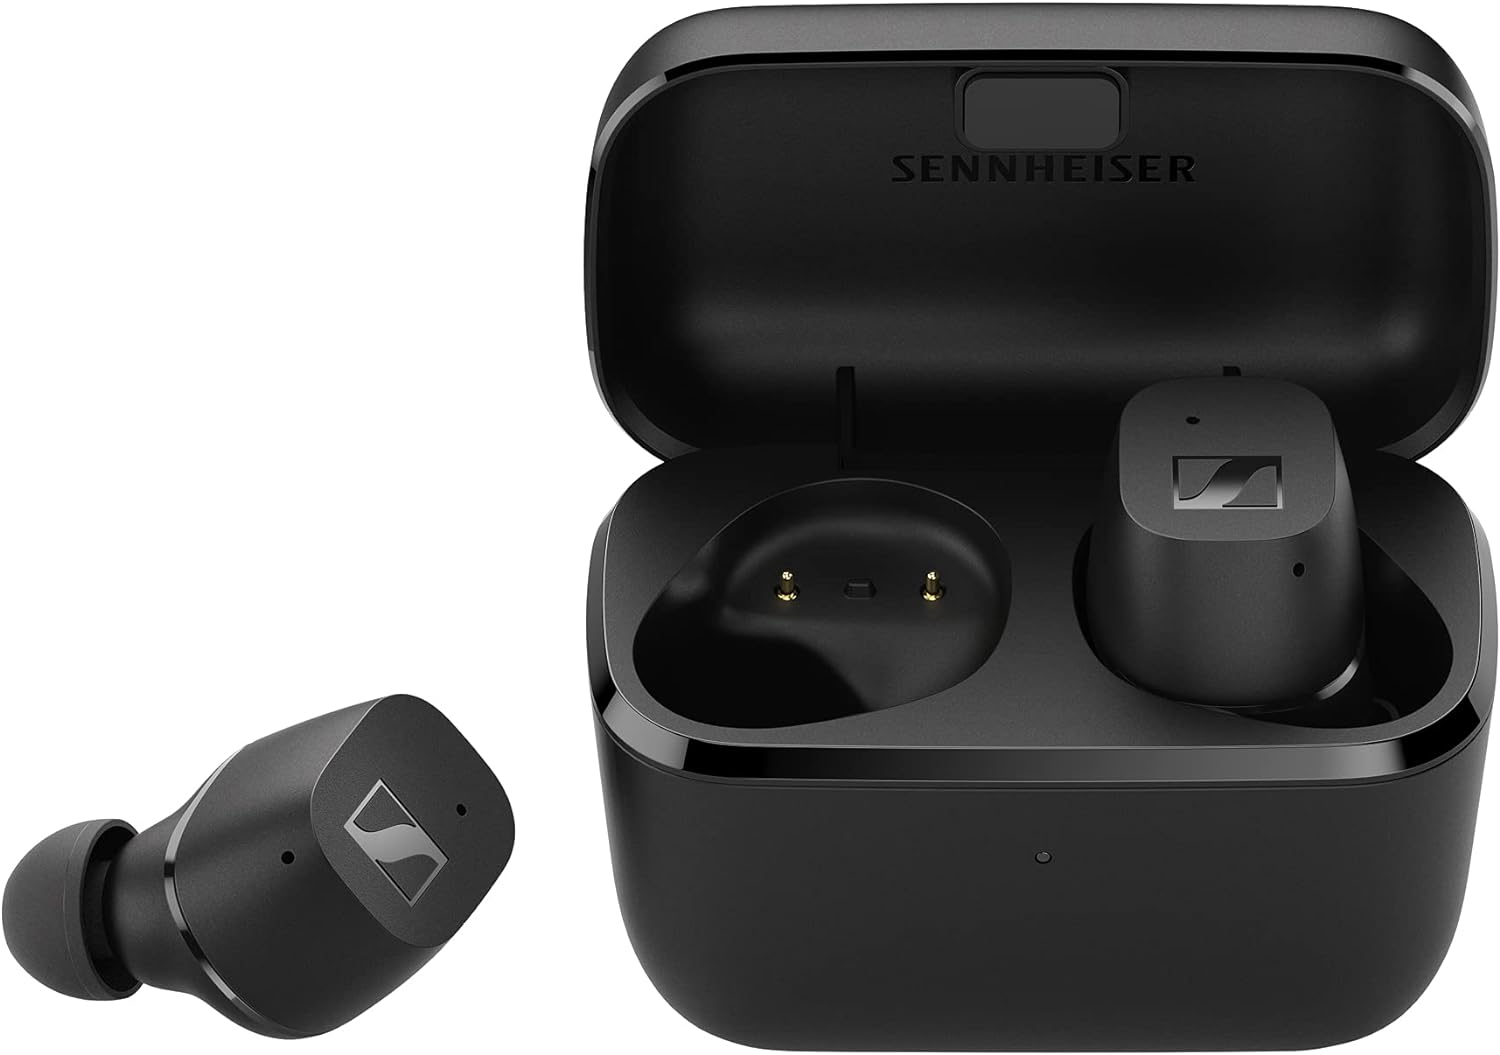 Sennheiser Consumer Audio CX True Wireless Earbuds Bluetooth In Ear Headphones for Music and Calls with Passive Noise Cancellation Touch Controls Bass Boost IPX4 and 27 hour Battery Life Black